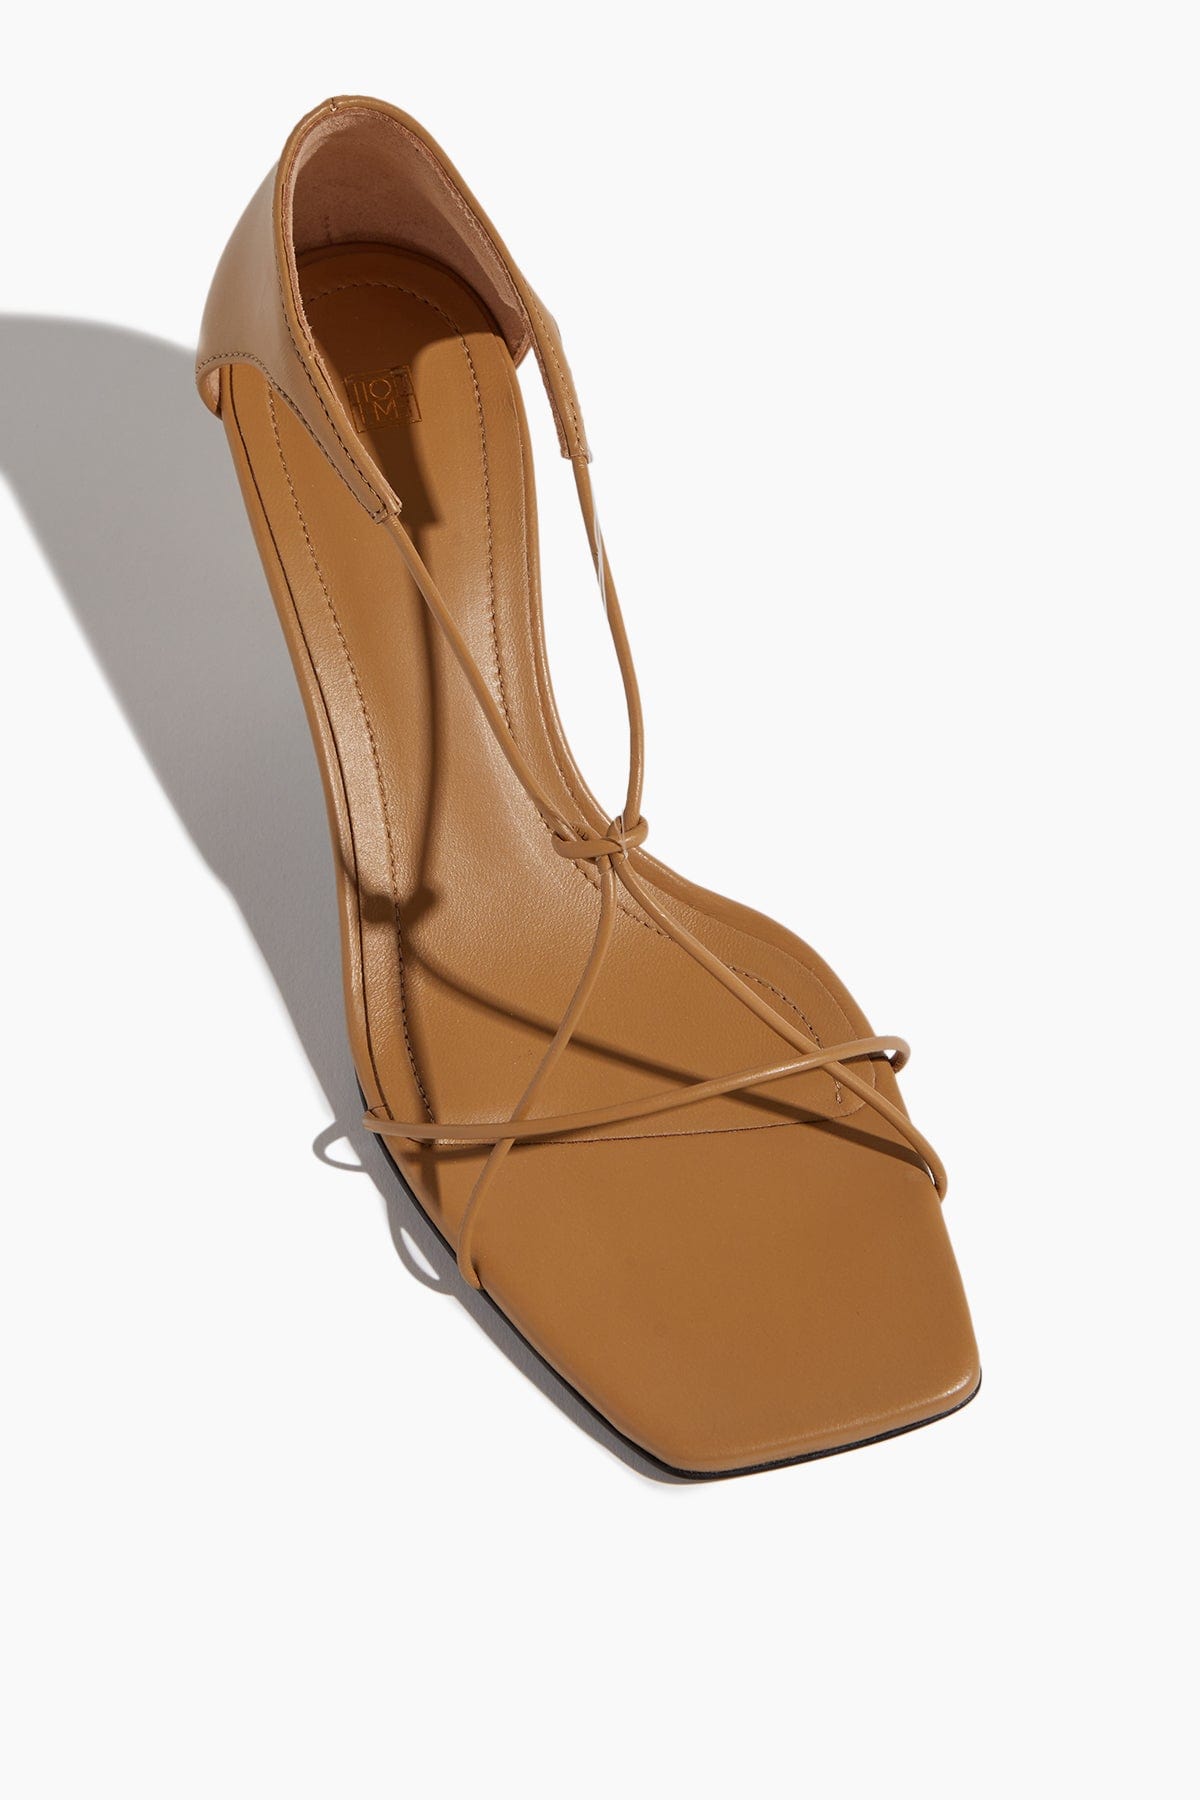 Toteme Strappy Heels Tie Knot Sandal in Caramel Toteme Tie Knot Sandal in Caramel